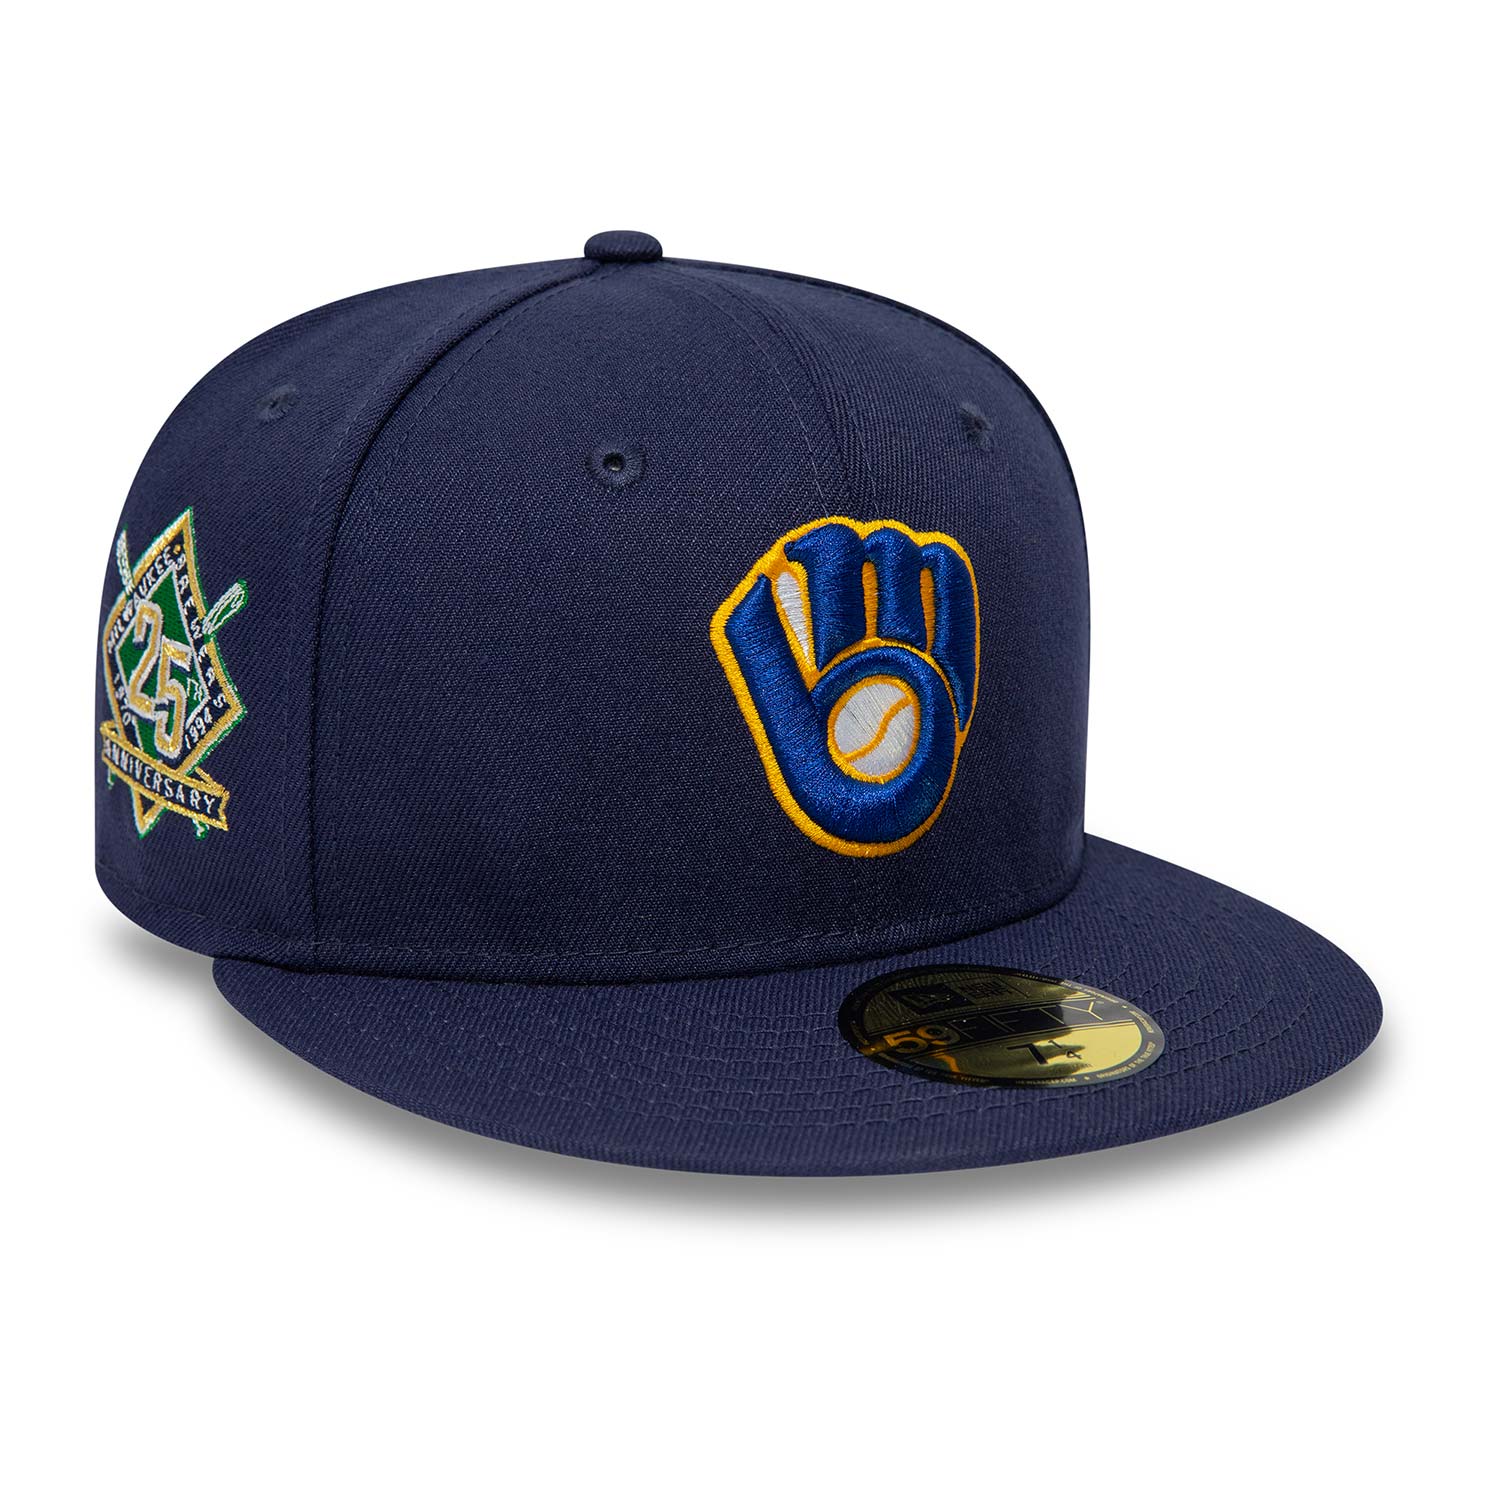 Milwaukee Brewers 25th Anniversary Navy 59FIFTY Fitted Cap